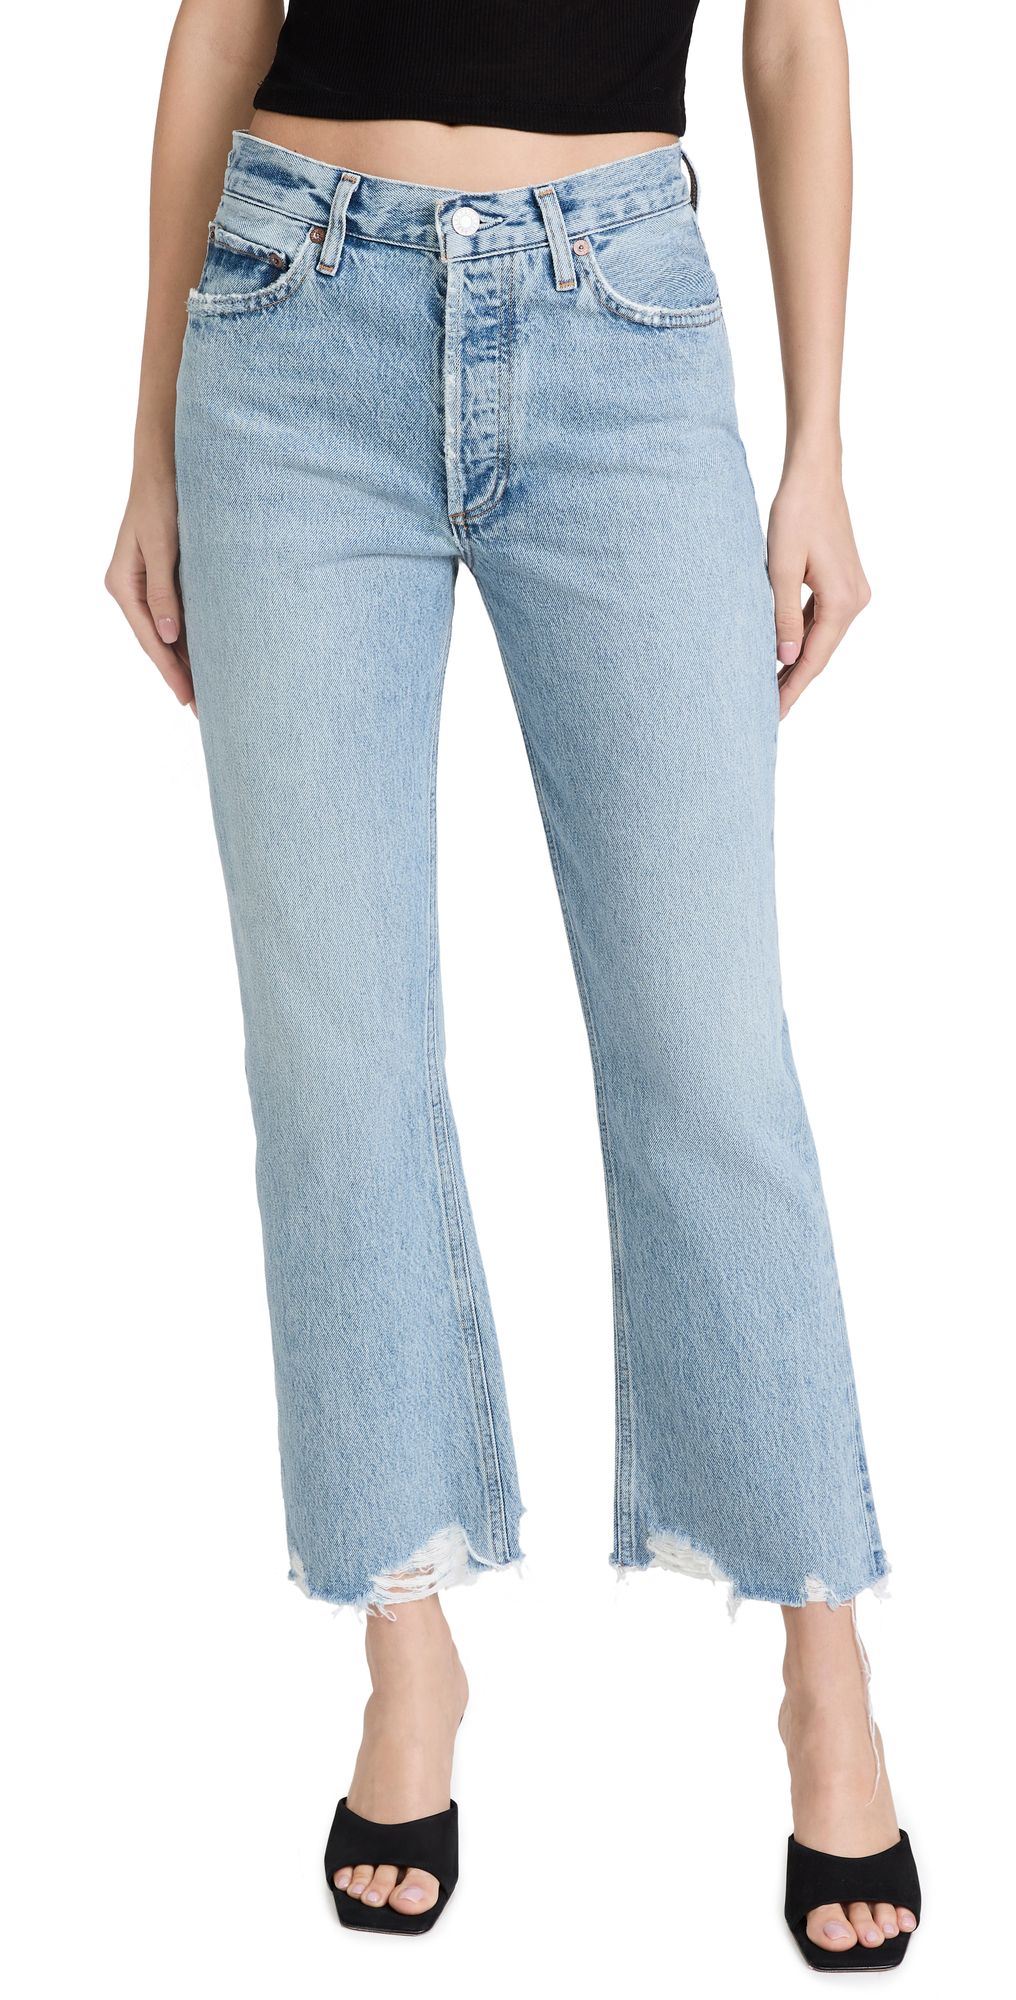 AGOLDE Relaxed Jeans | SHOPBOP | Shopbop